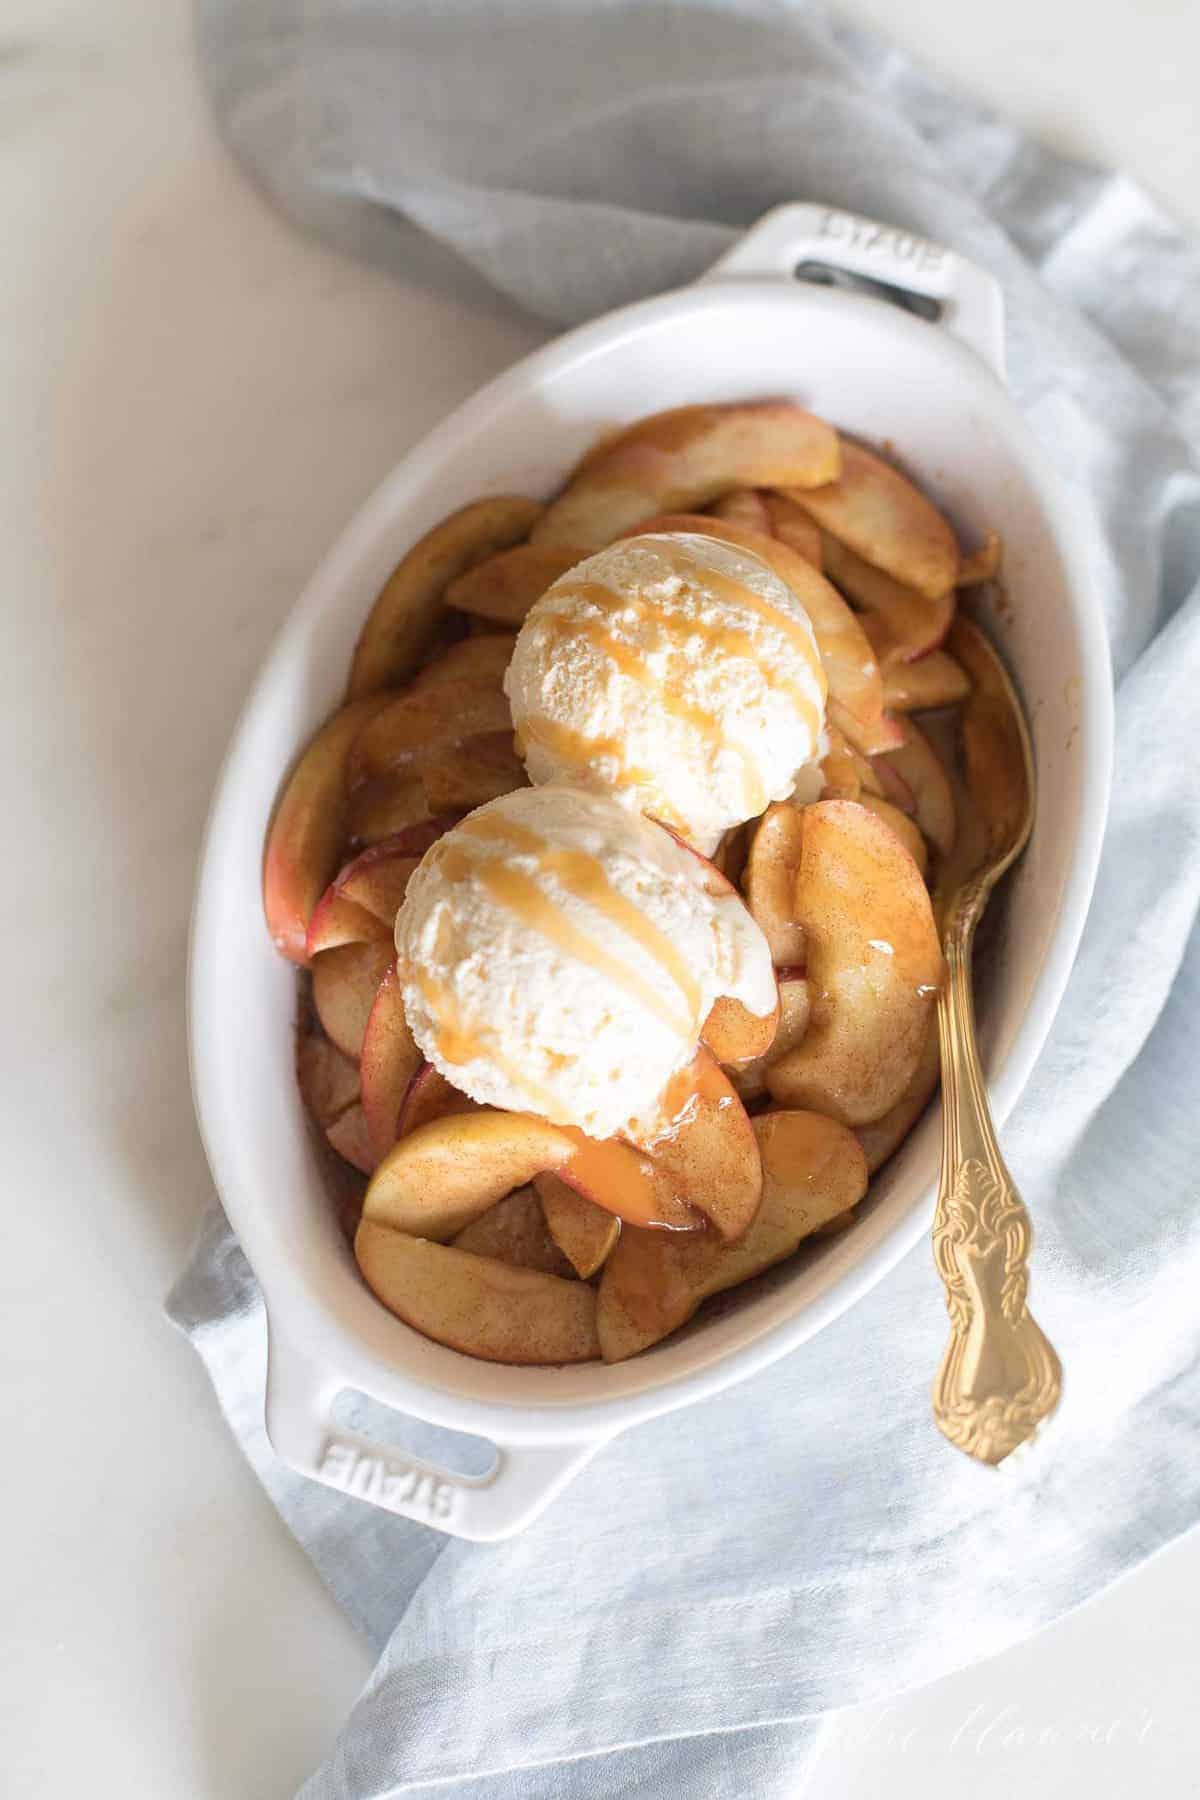 White surface, towel to the side, with a big white baking dish full of baked apples topped with ice cream.